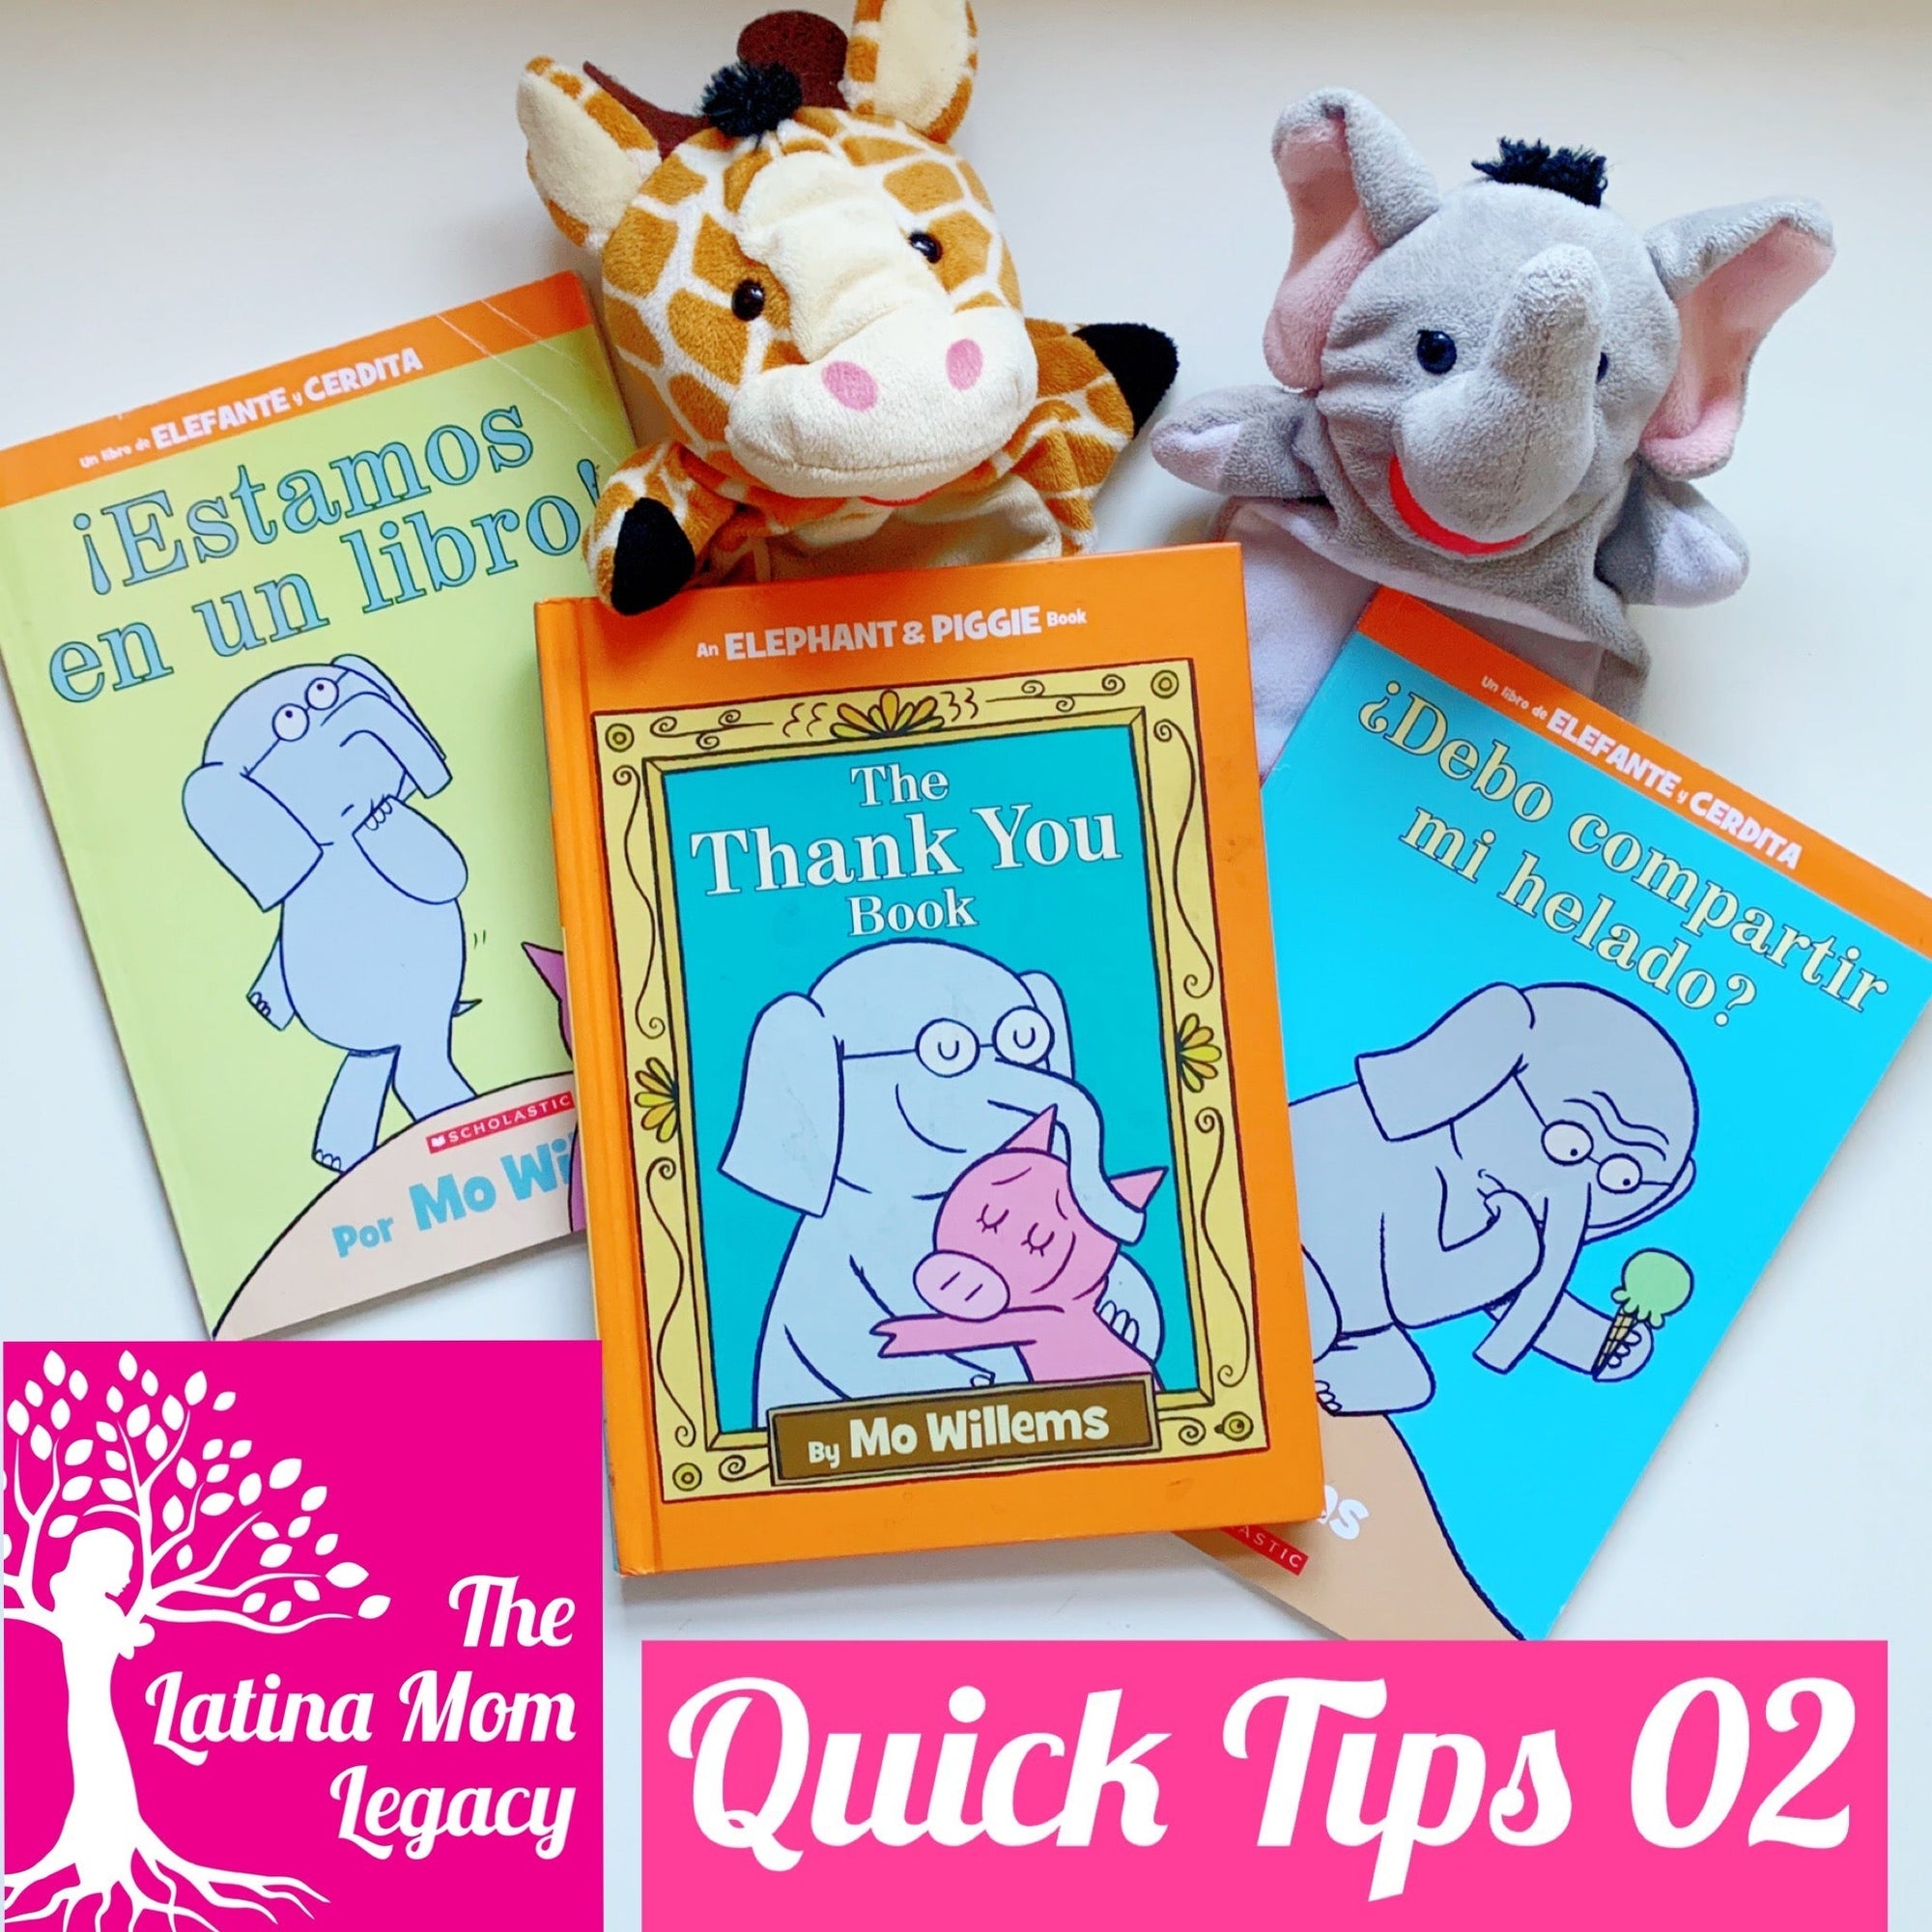 The Latina Mom Legacy Quick Tip 02 - Books For Thanksgiving by Mo Willems - Mi LegaSi